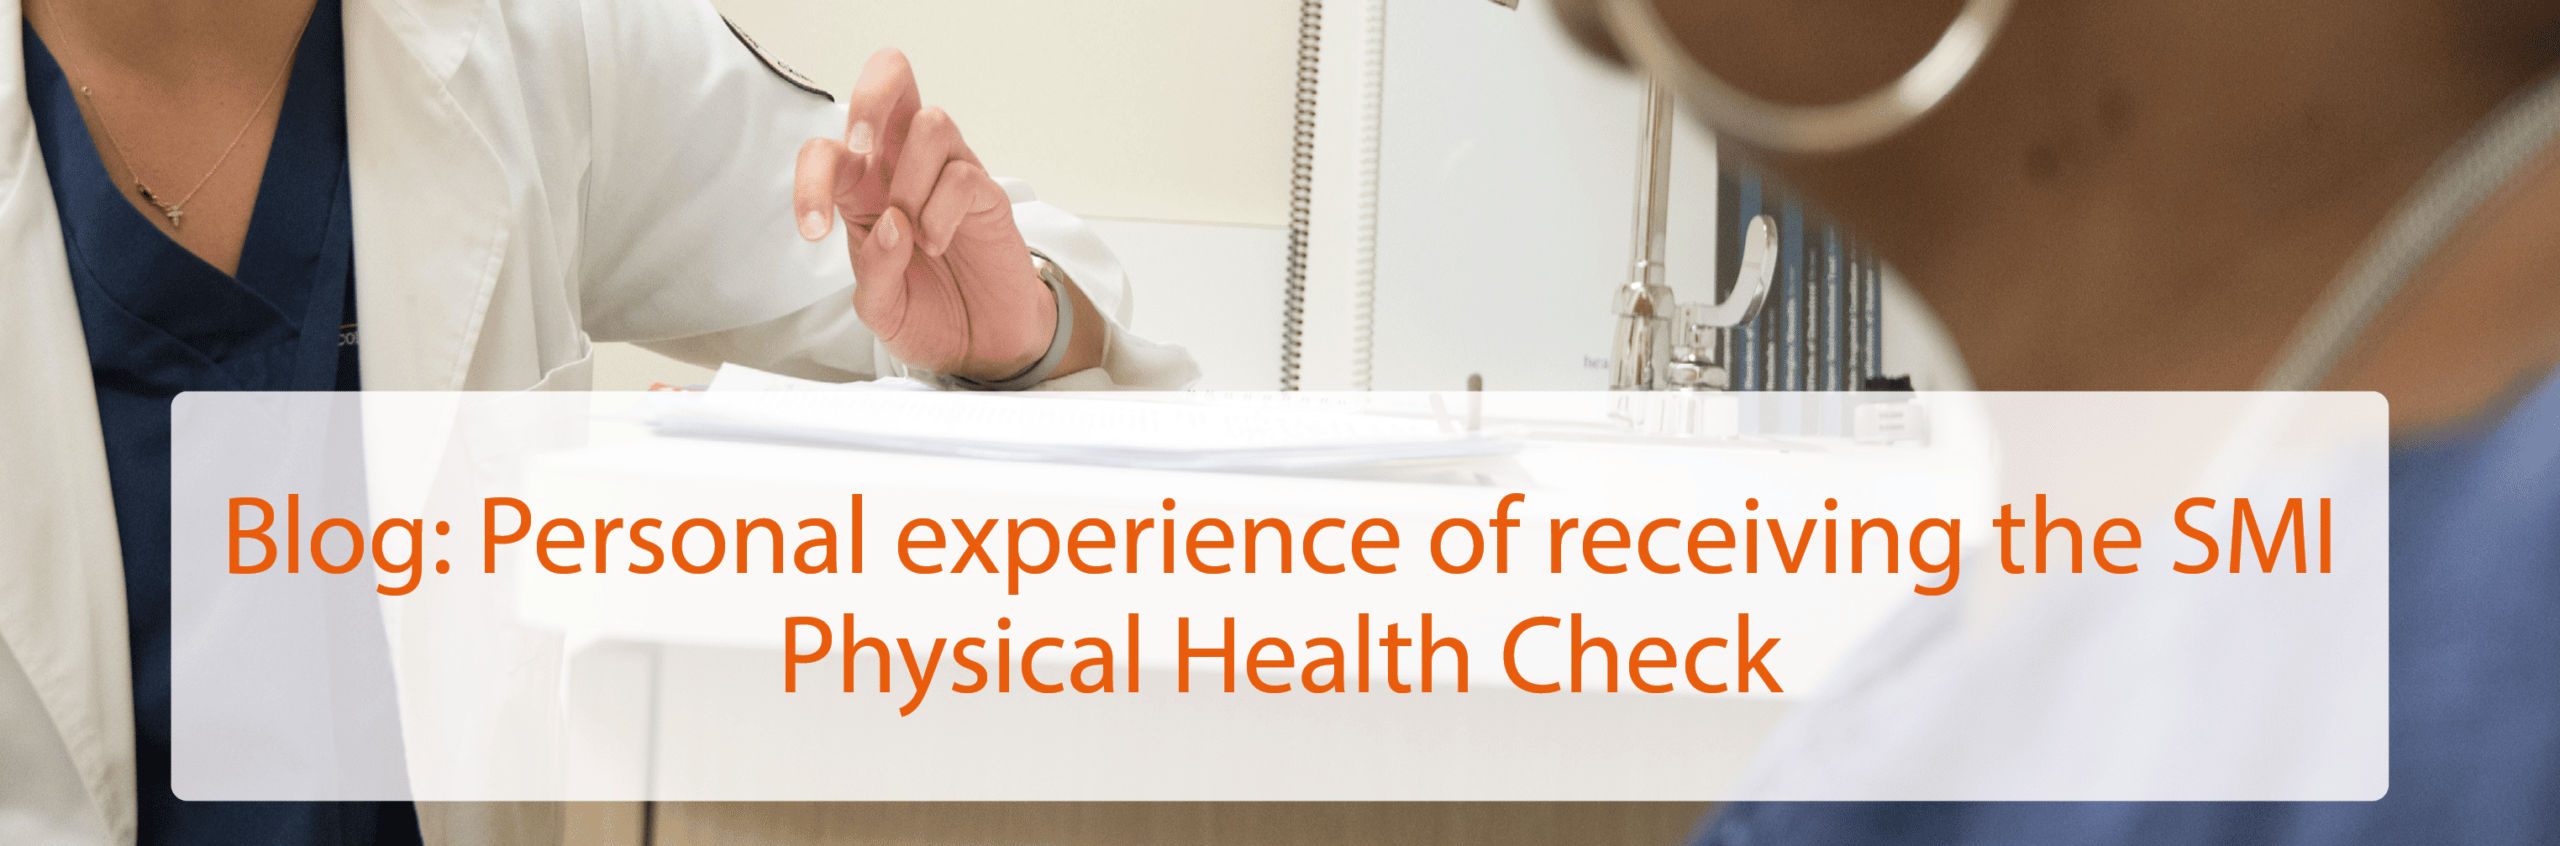 Blog: Personal experience of receiving the SMI Physical Health Check